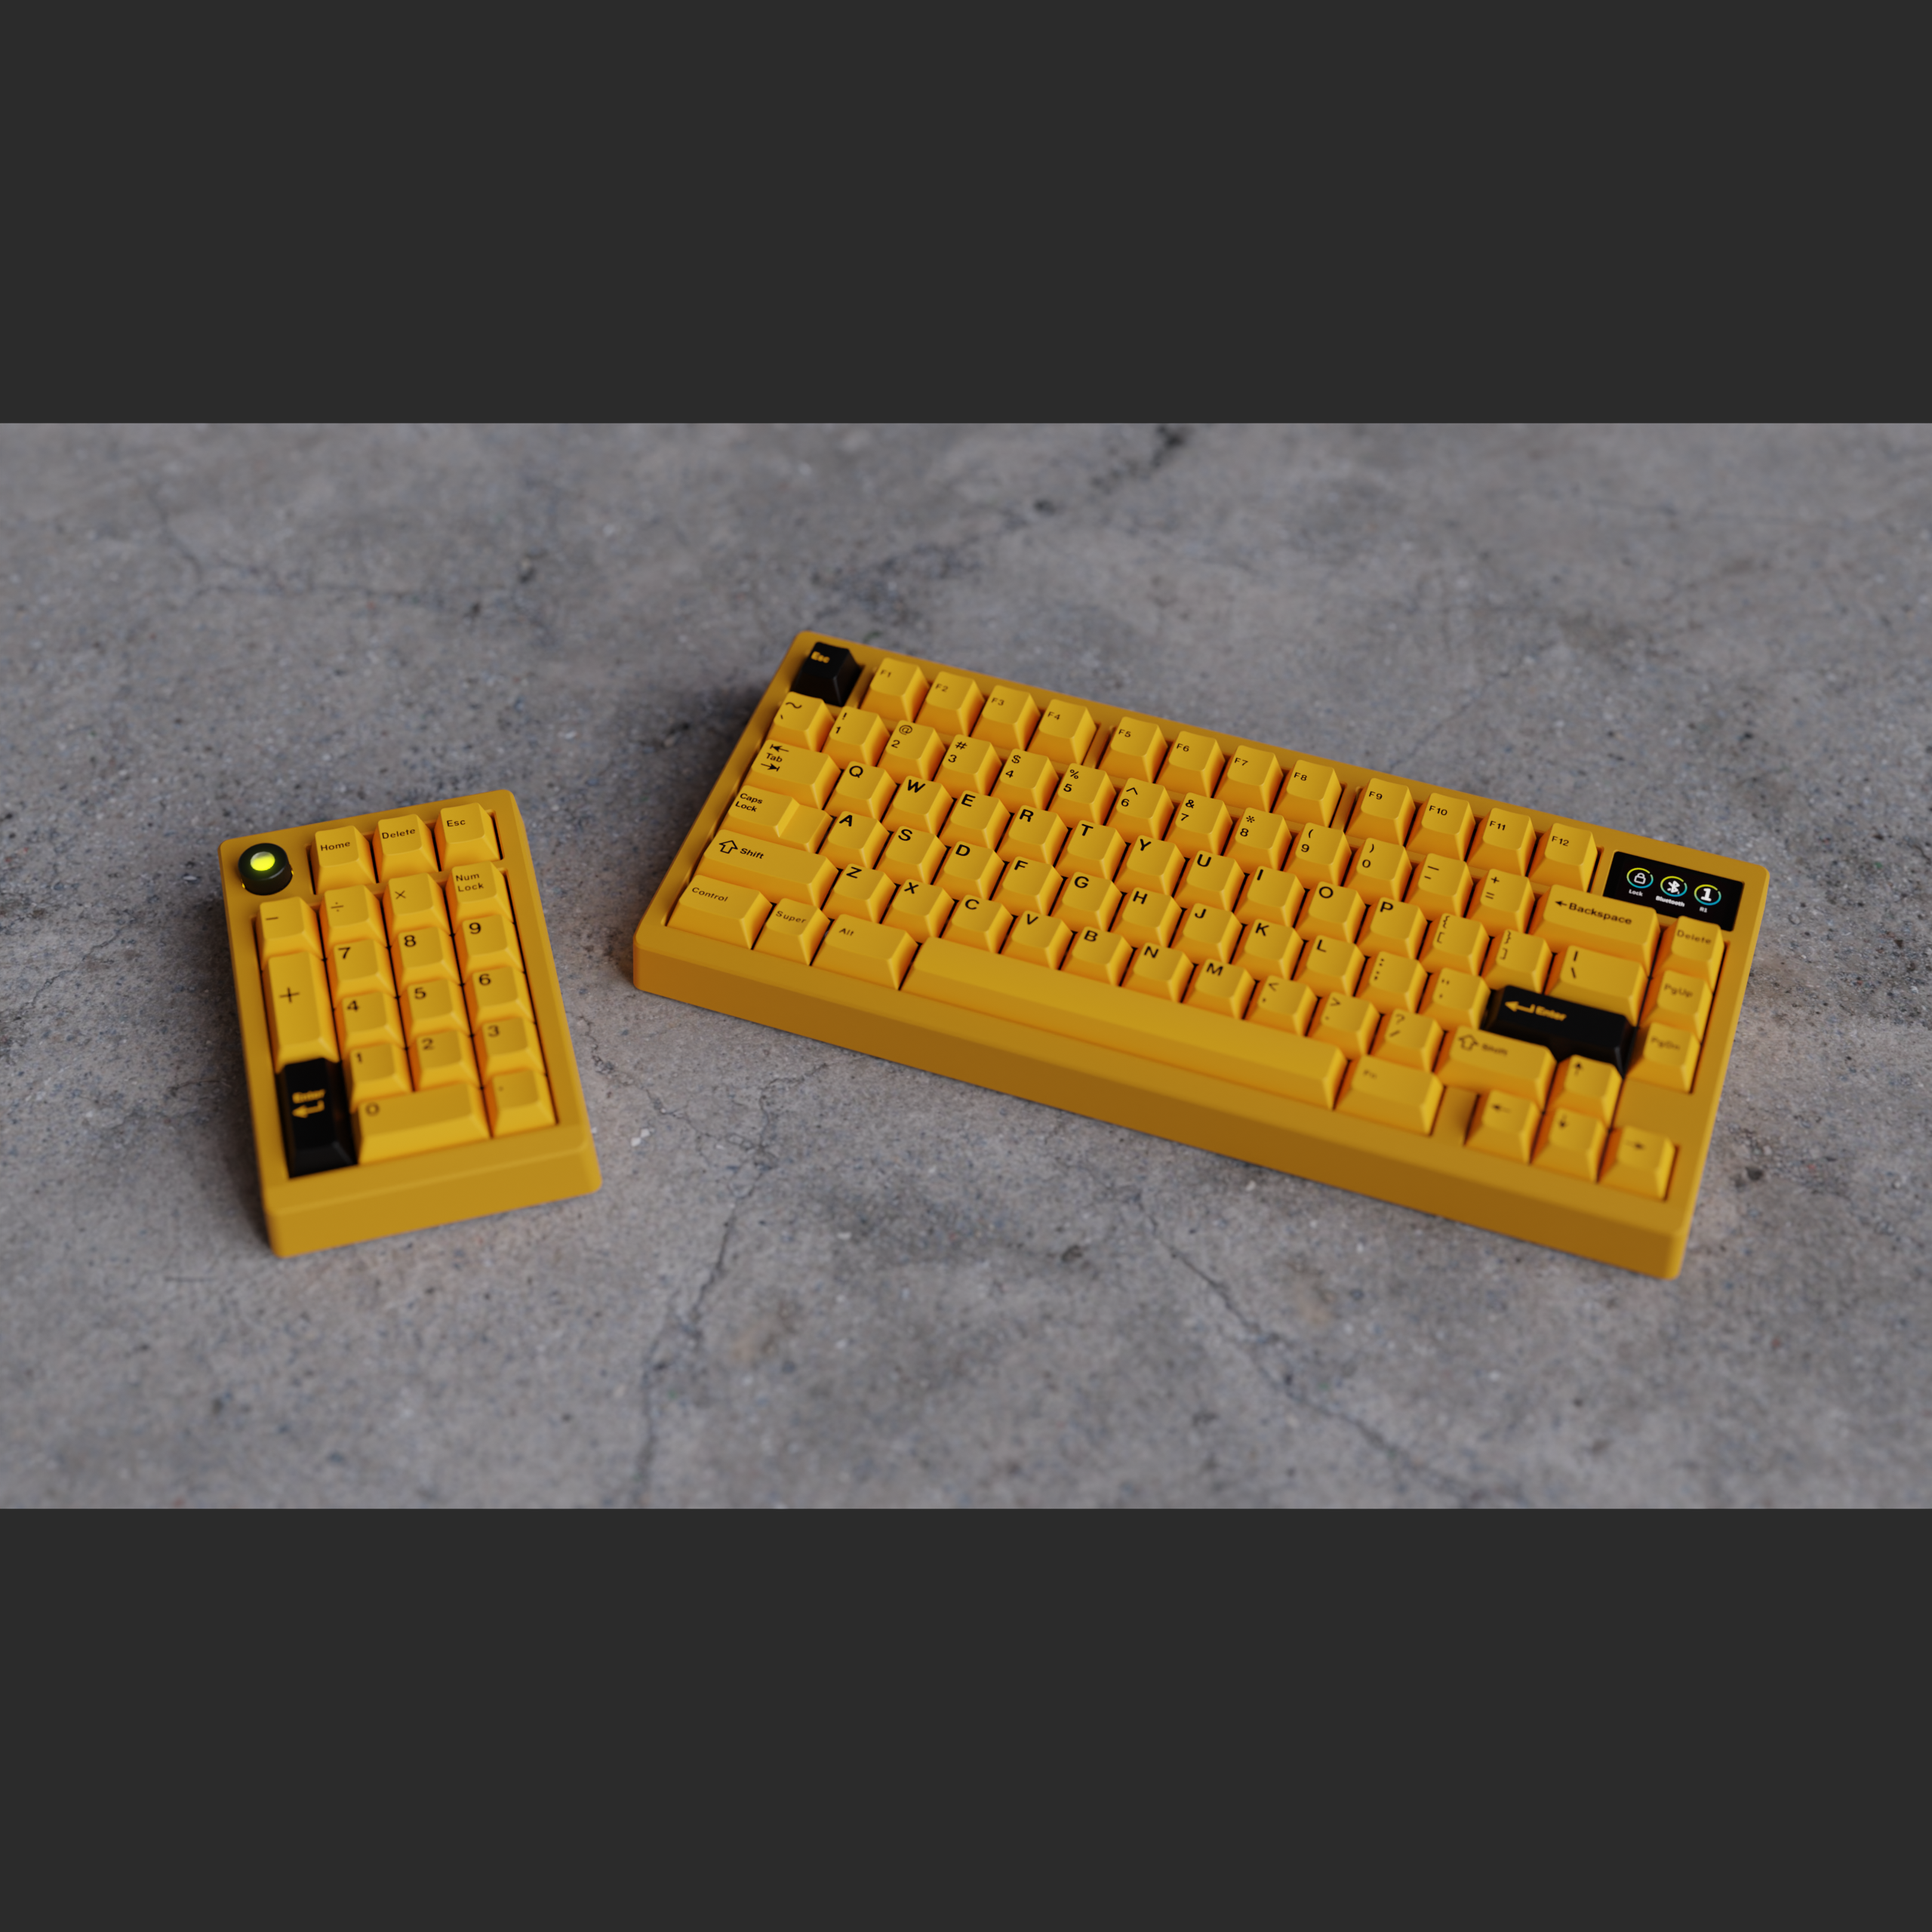 ZoomPad Essential Edition - Cyber Yellow